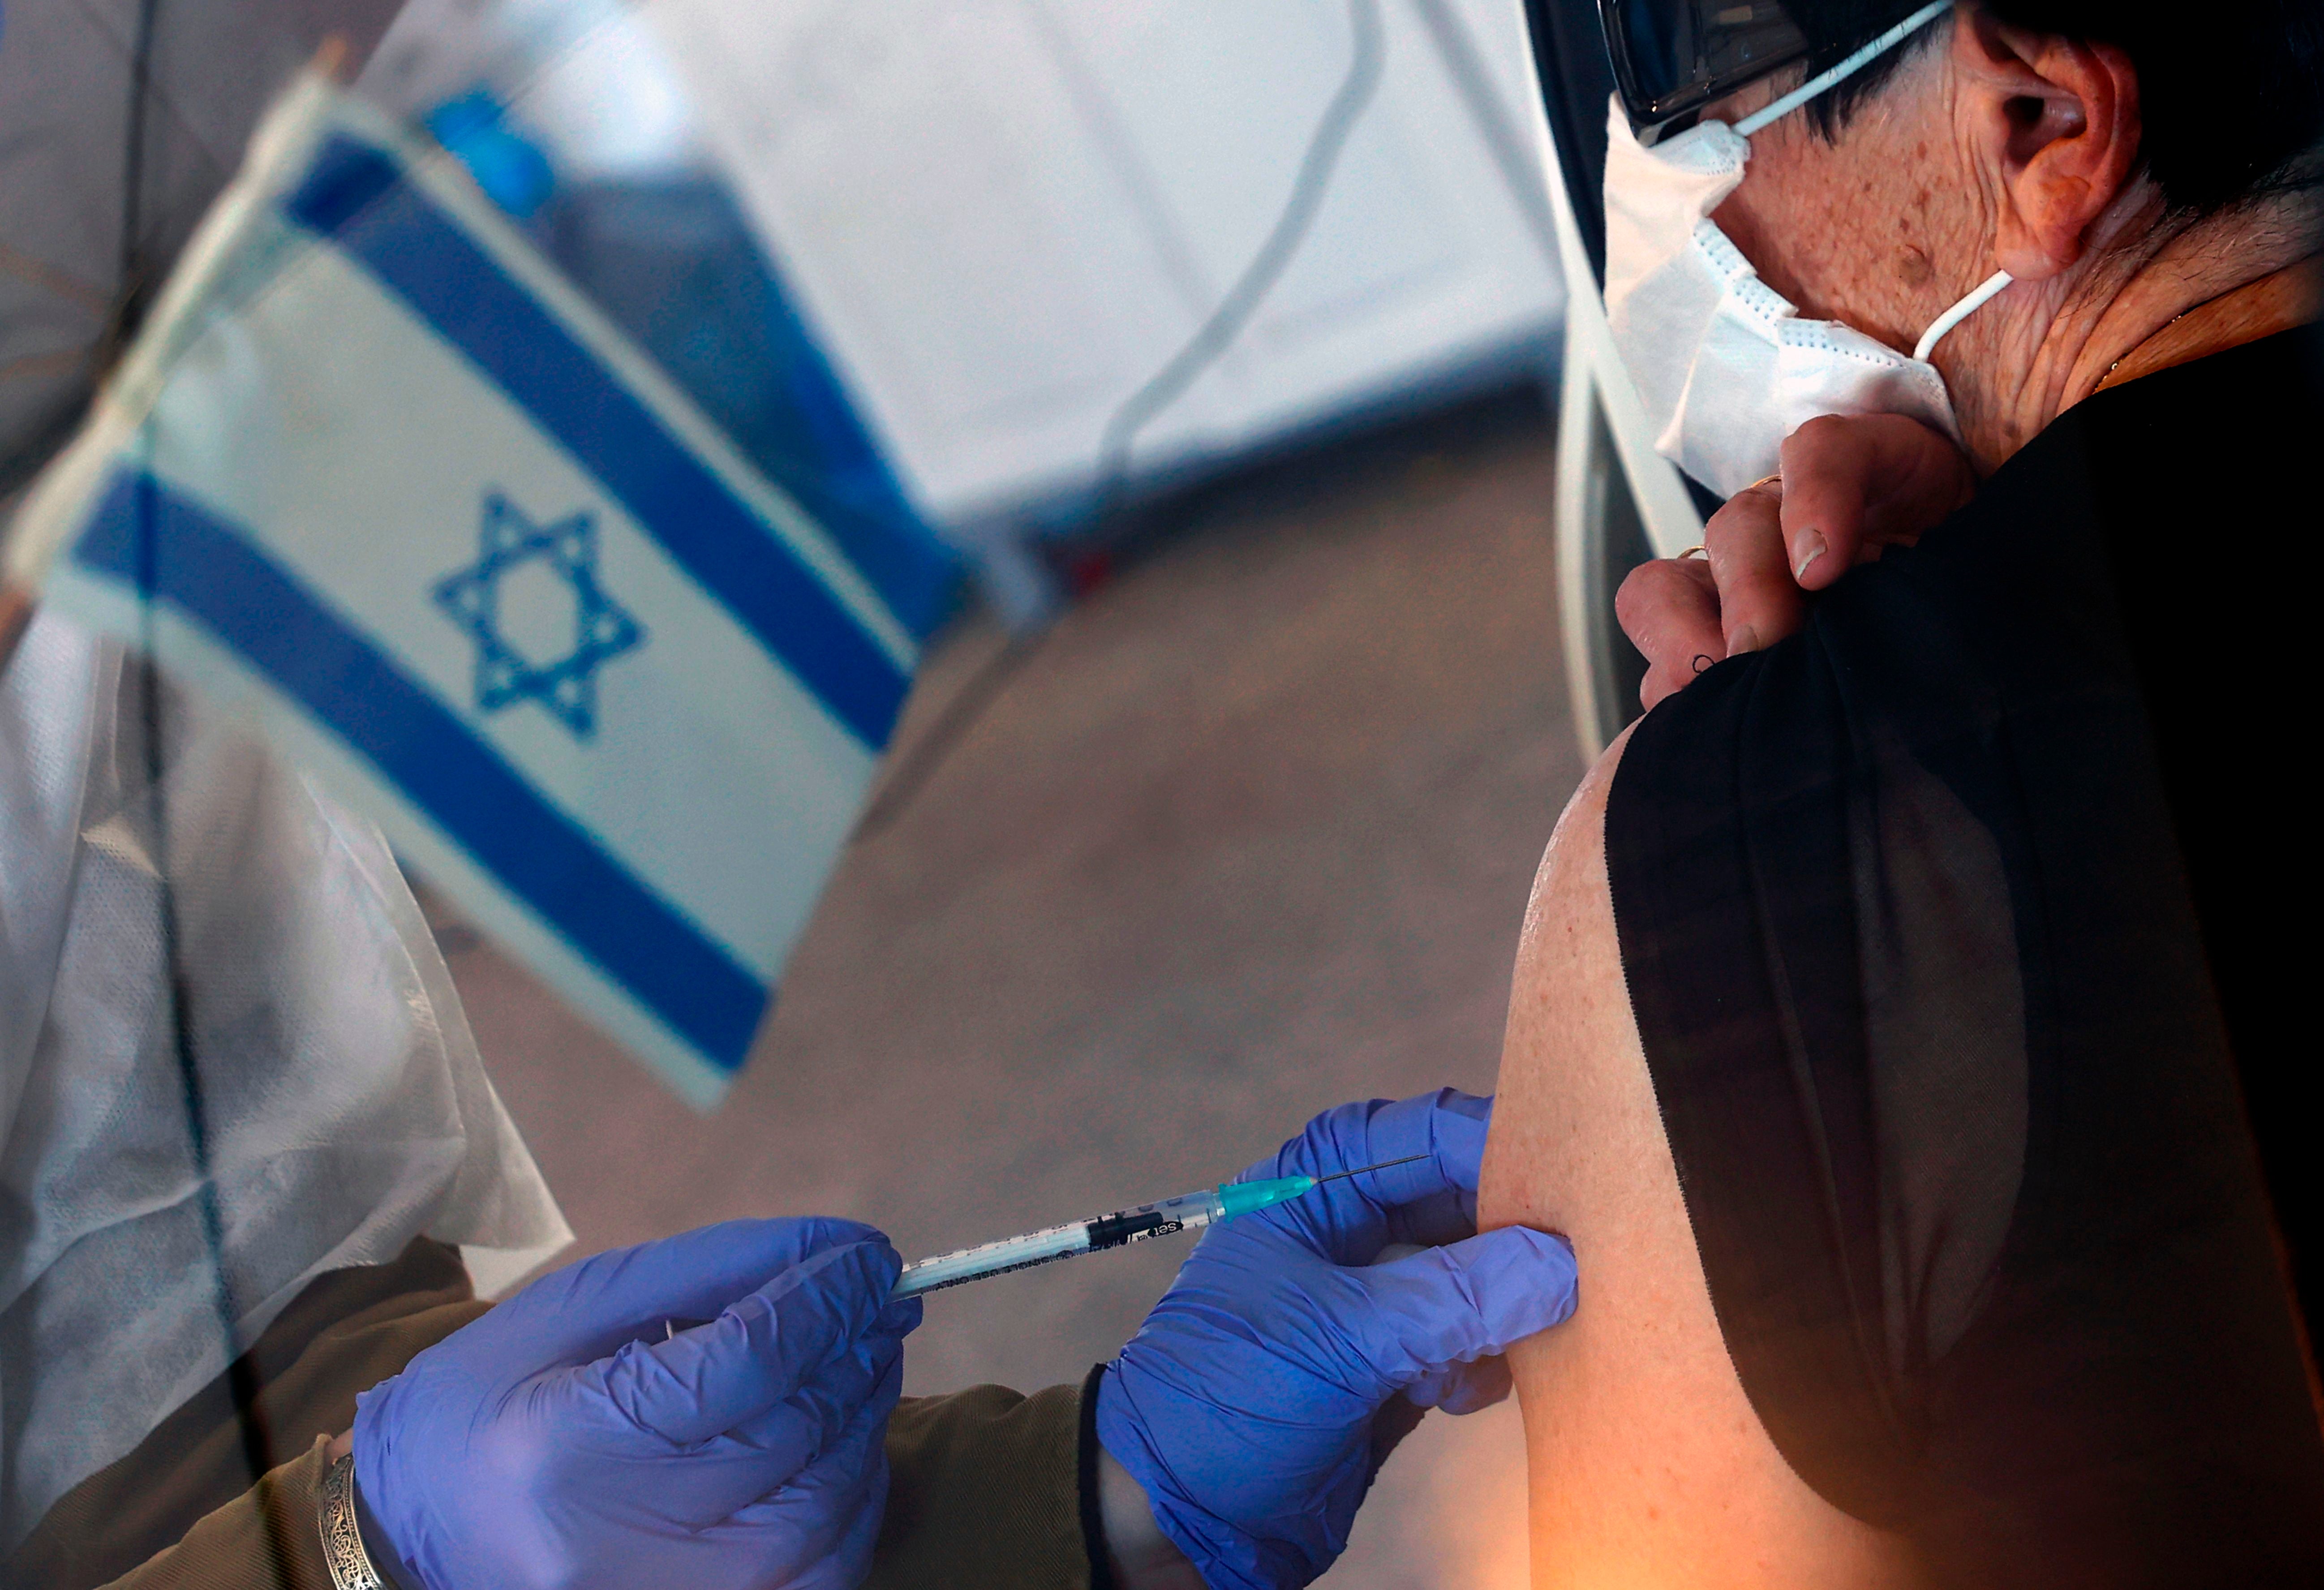 An Israeli senior citizen receives her second Pfizer Covid vaccine at the Maccabi Health Services drive-in vaccination center, in the northern coastal city of Haifa